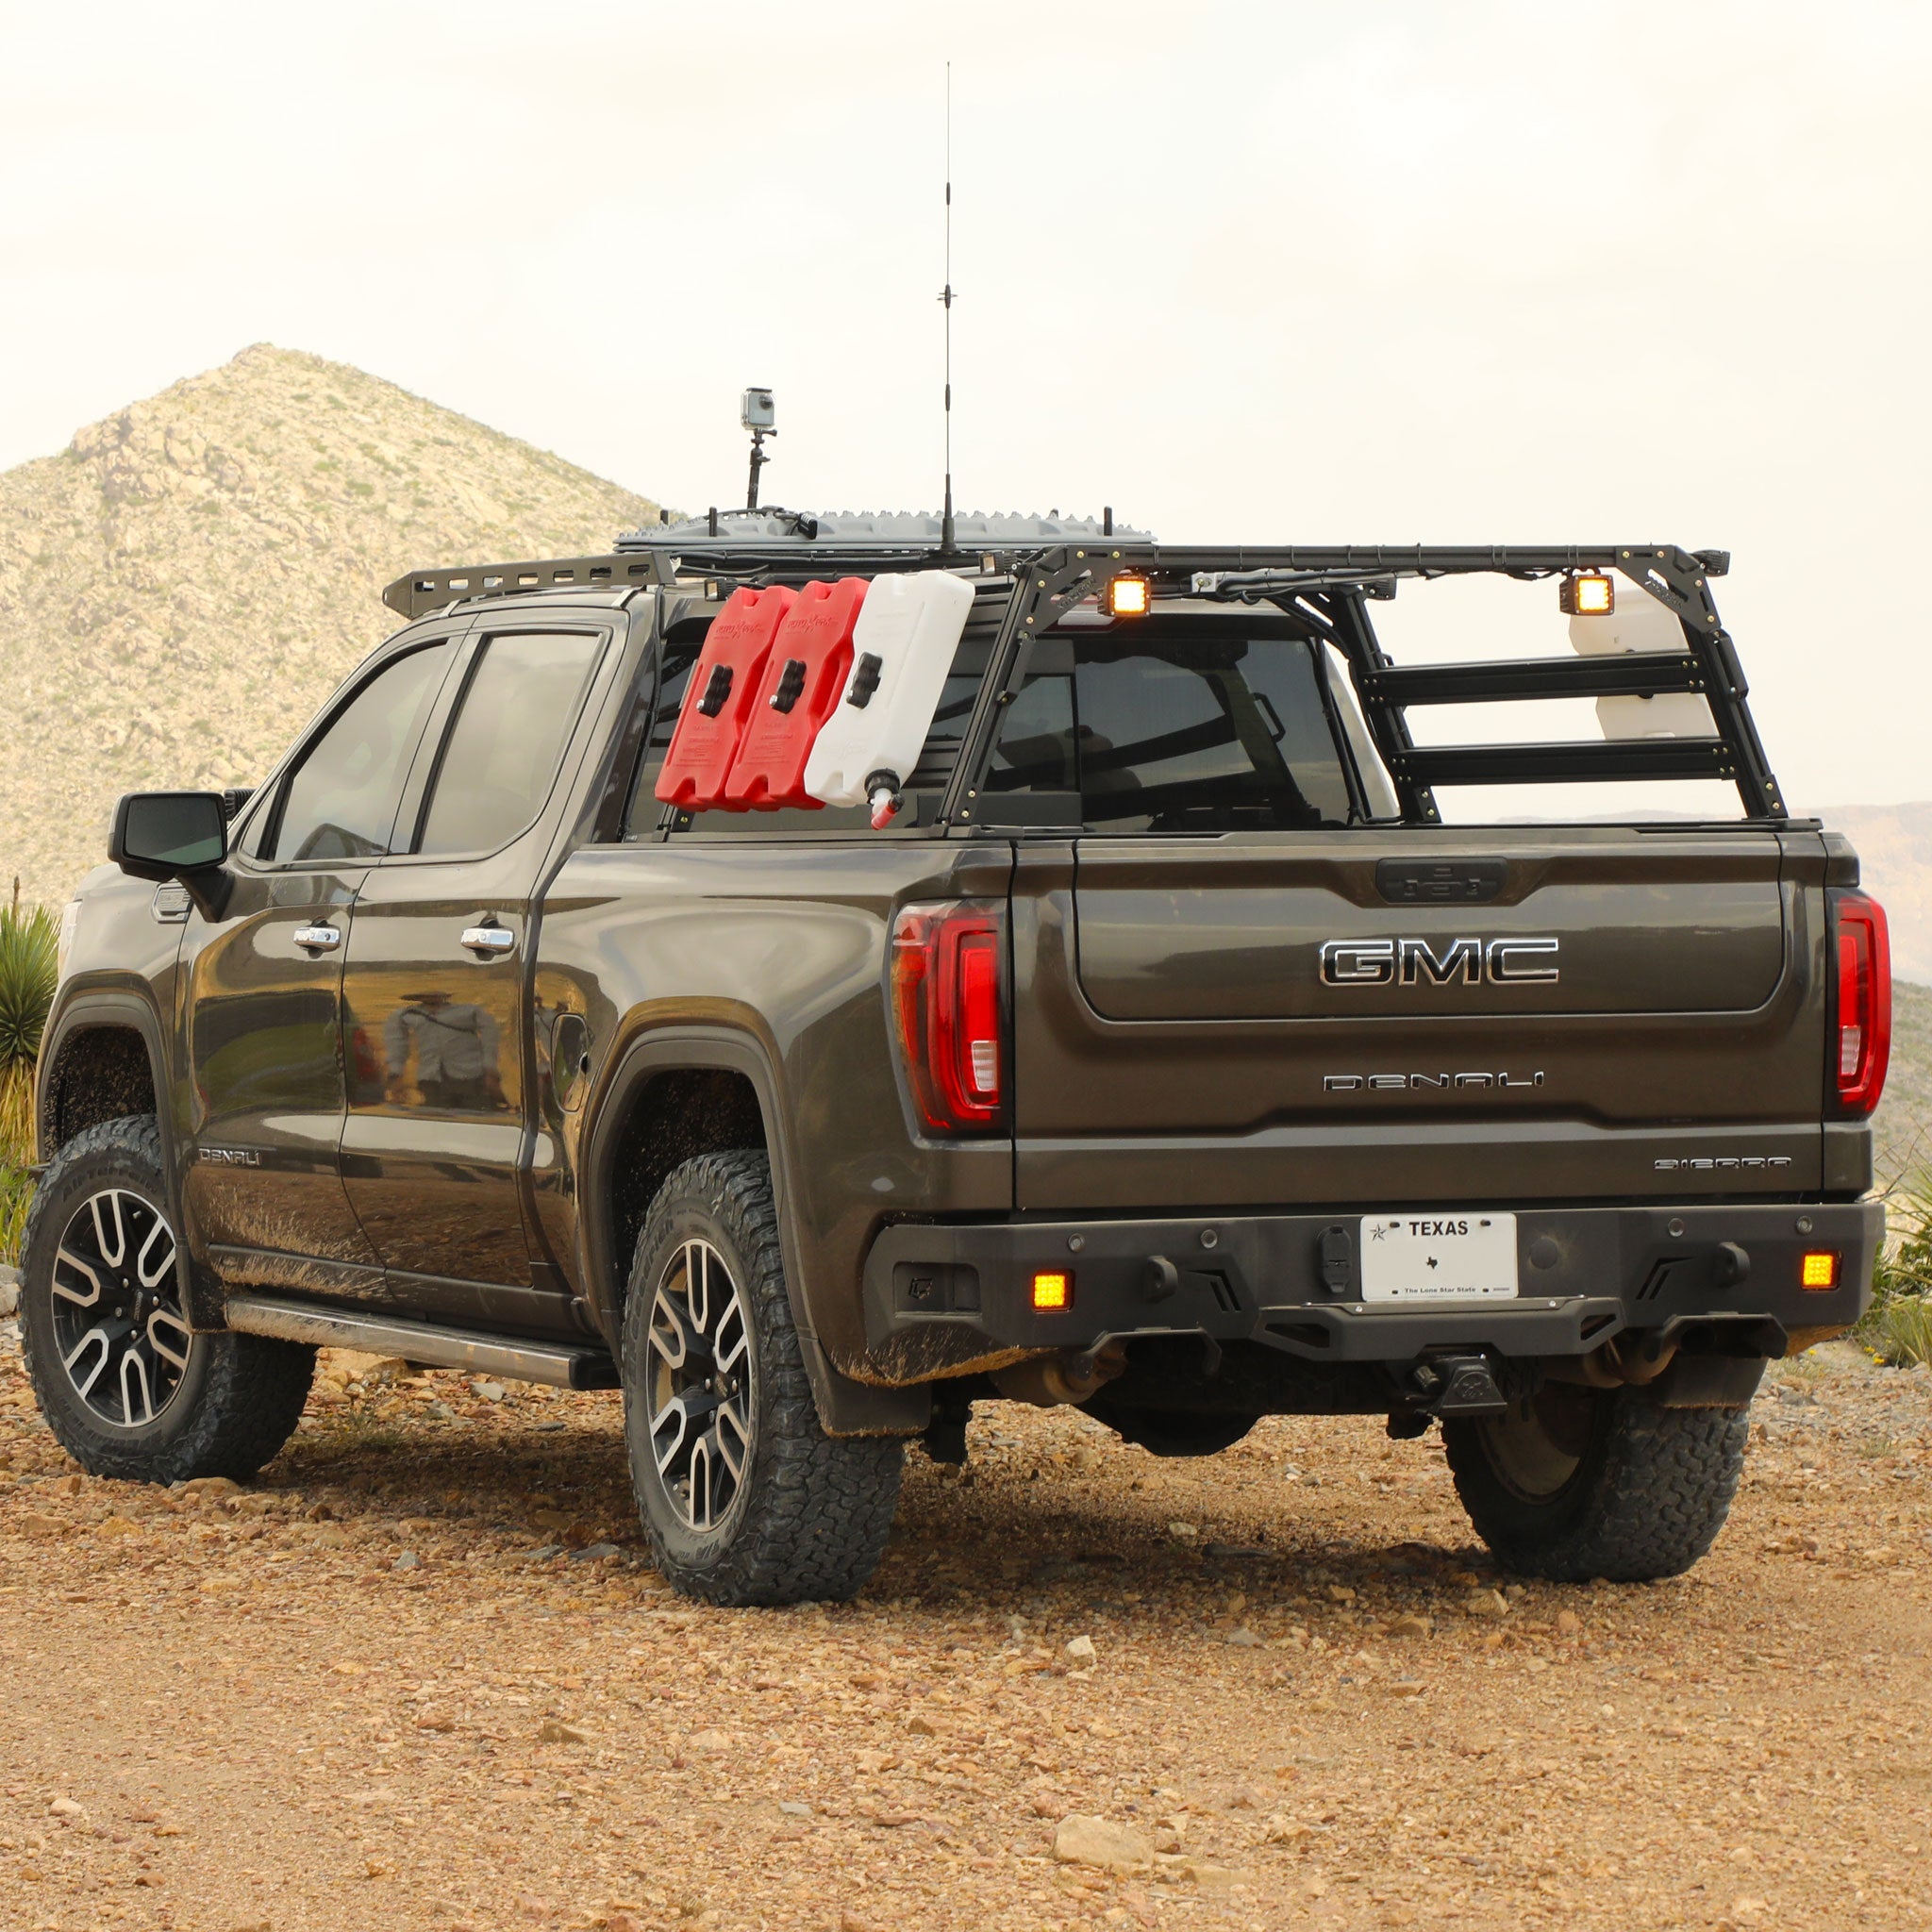 GMC Denali Sierra Xtrusion Overland Bed Rack with RotoPax, and Off-road lights.